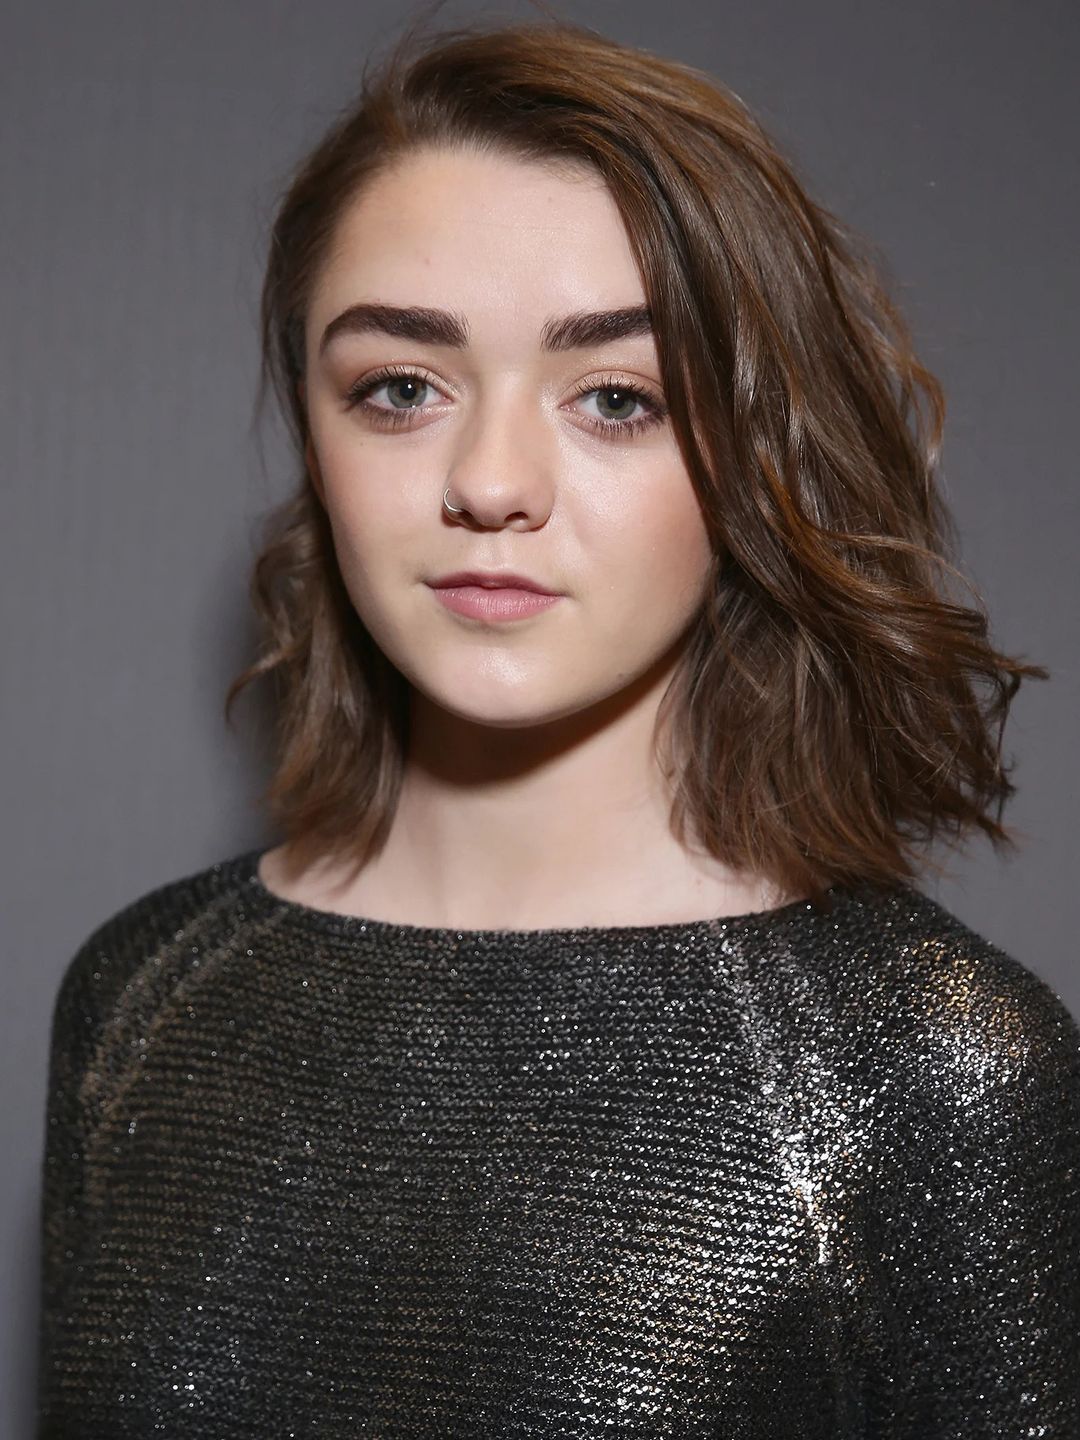 Maisie Williams early life